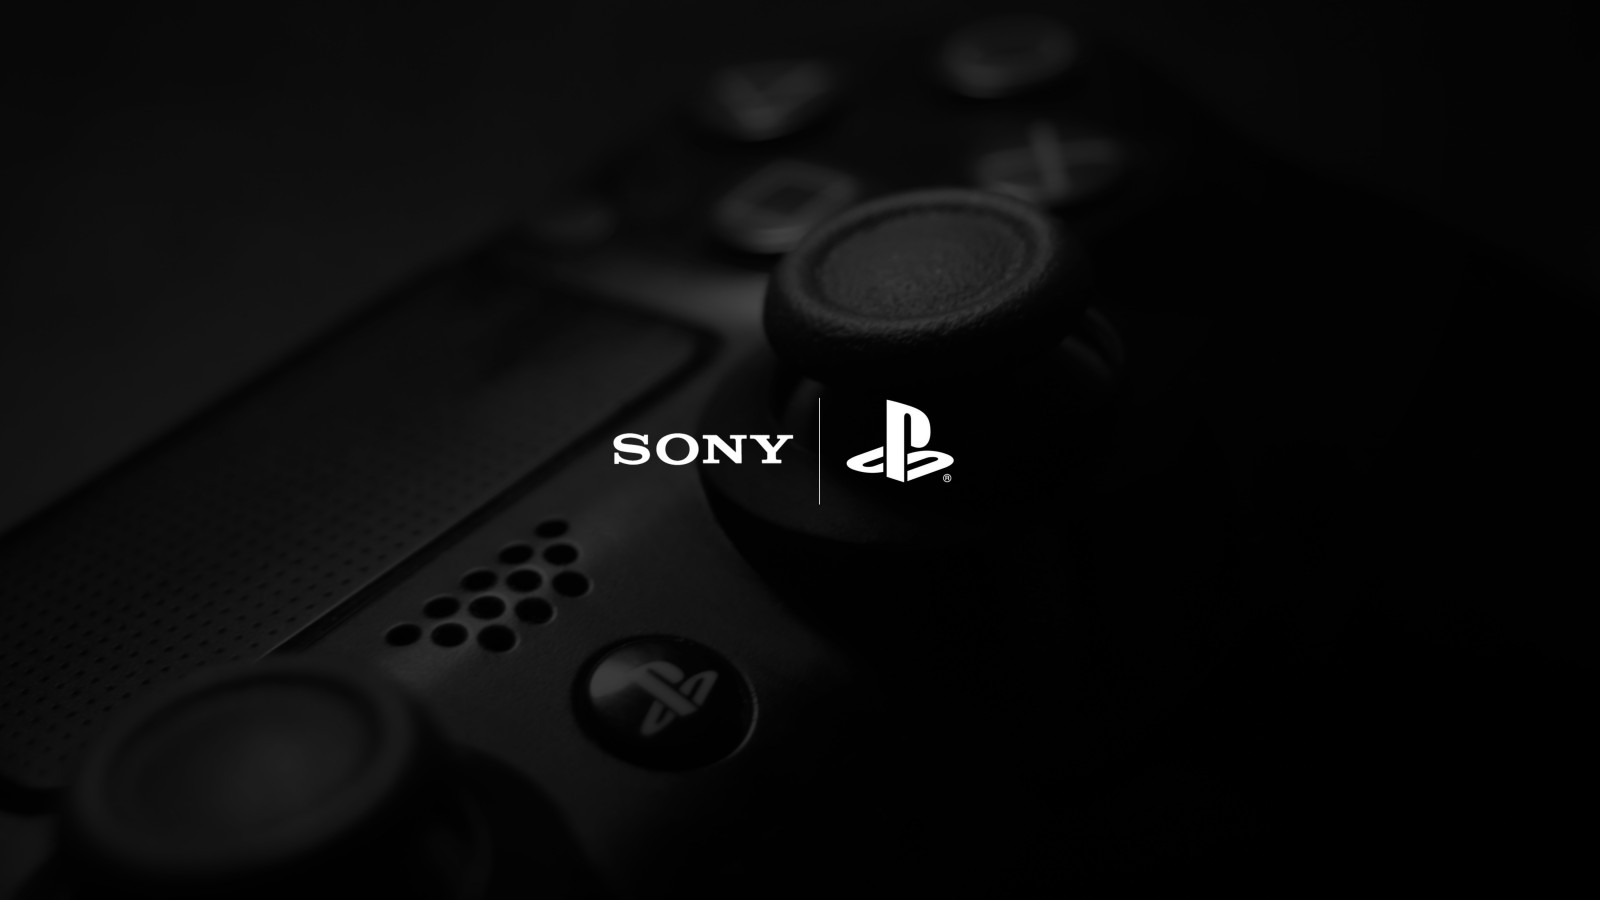 Wallpaper, PlayStation Playstation 4 Pro, controller, Sony, 4Gamers, Gamer, monochrome 6000x3375